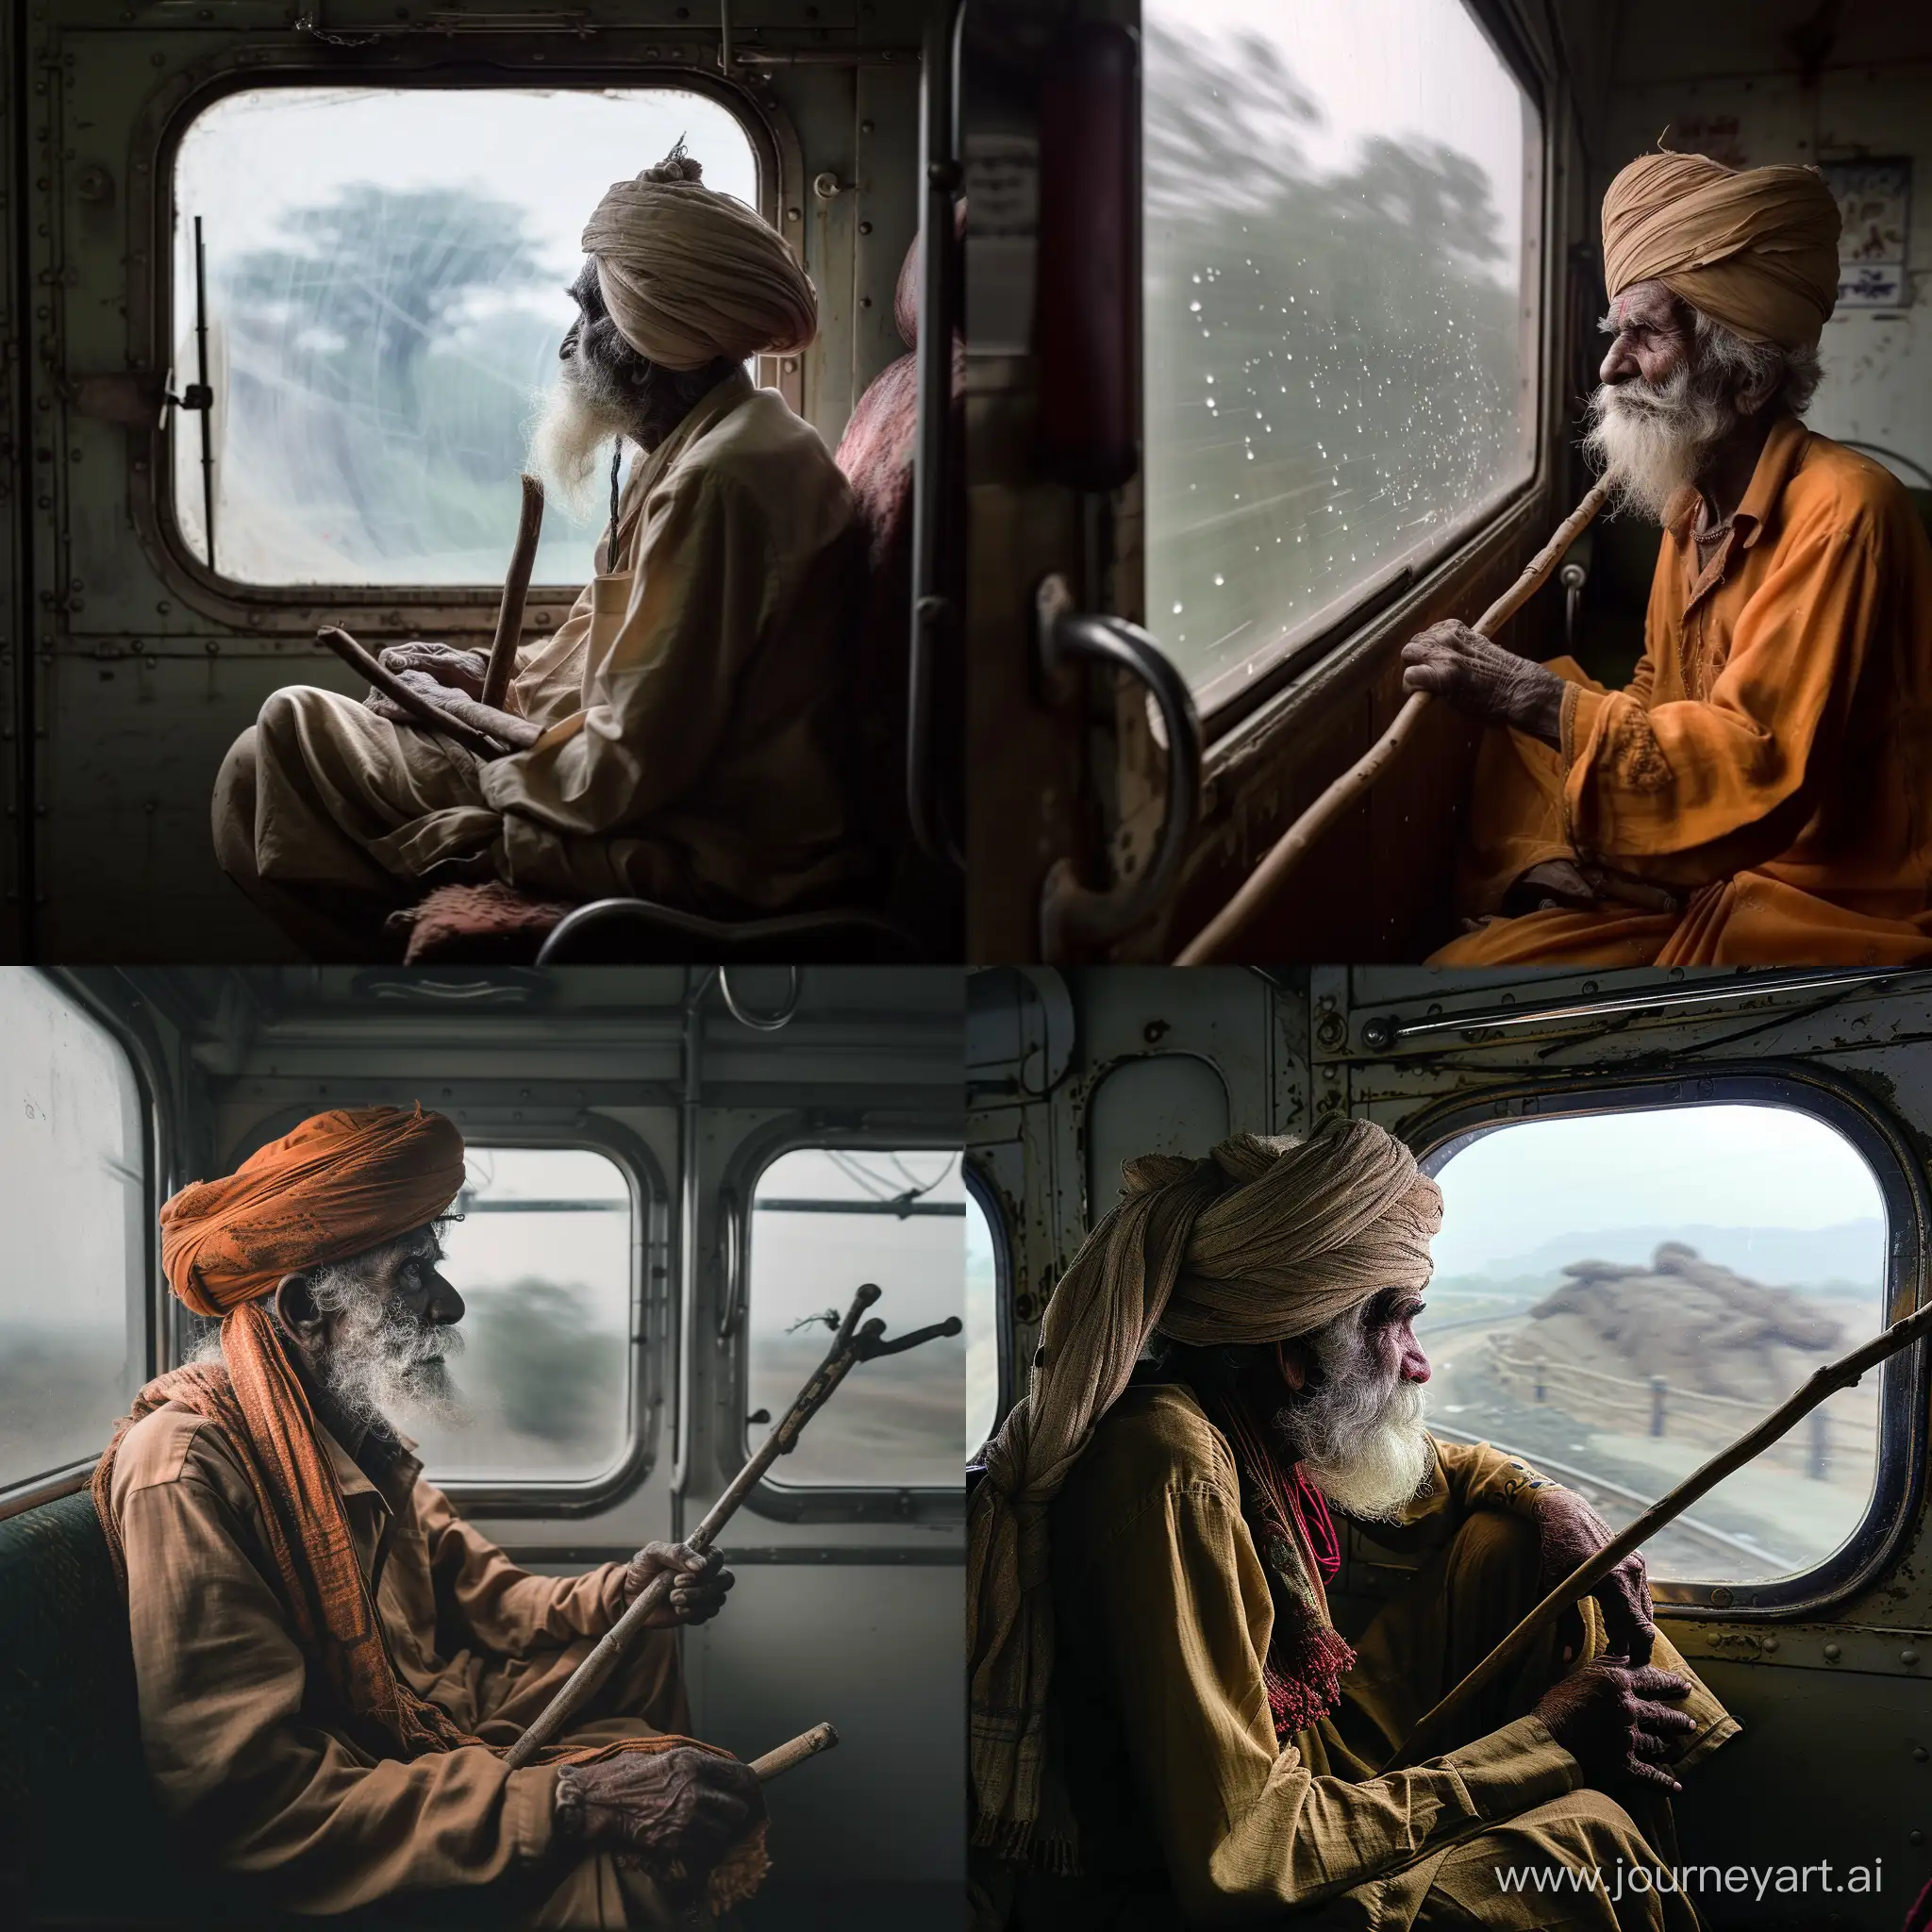 Aged-Rabari-Nomads-Contemplating-Life-in-Vintage-Train-Journey